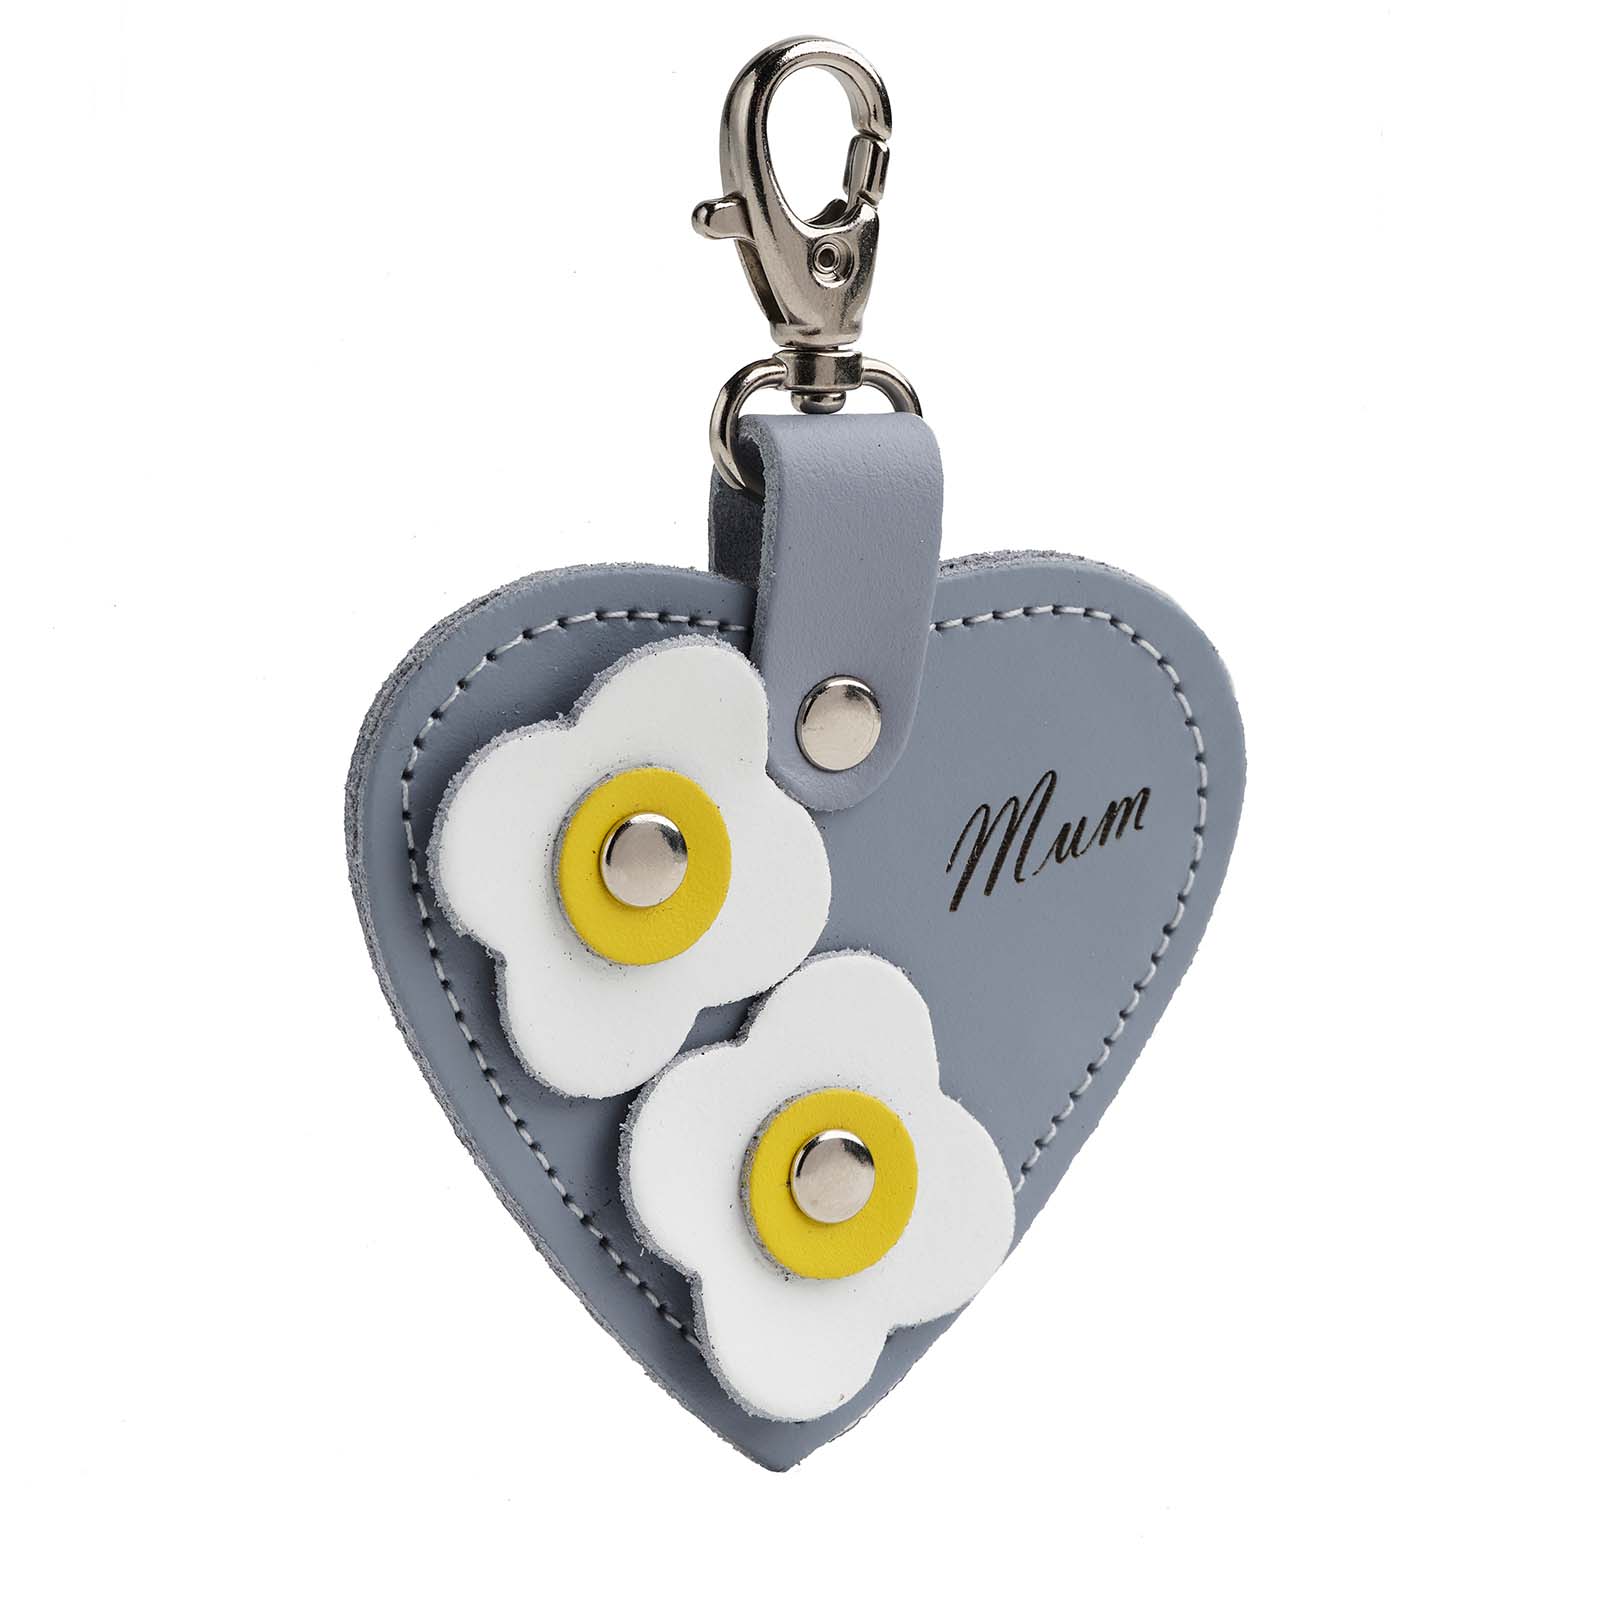 Love heart bag charm - with ’Mum’ engraving and flower appliques - Lilac Grey